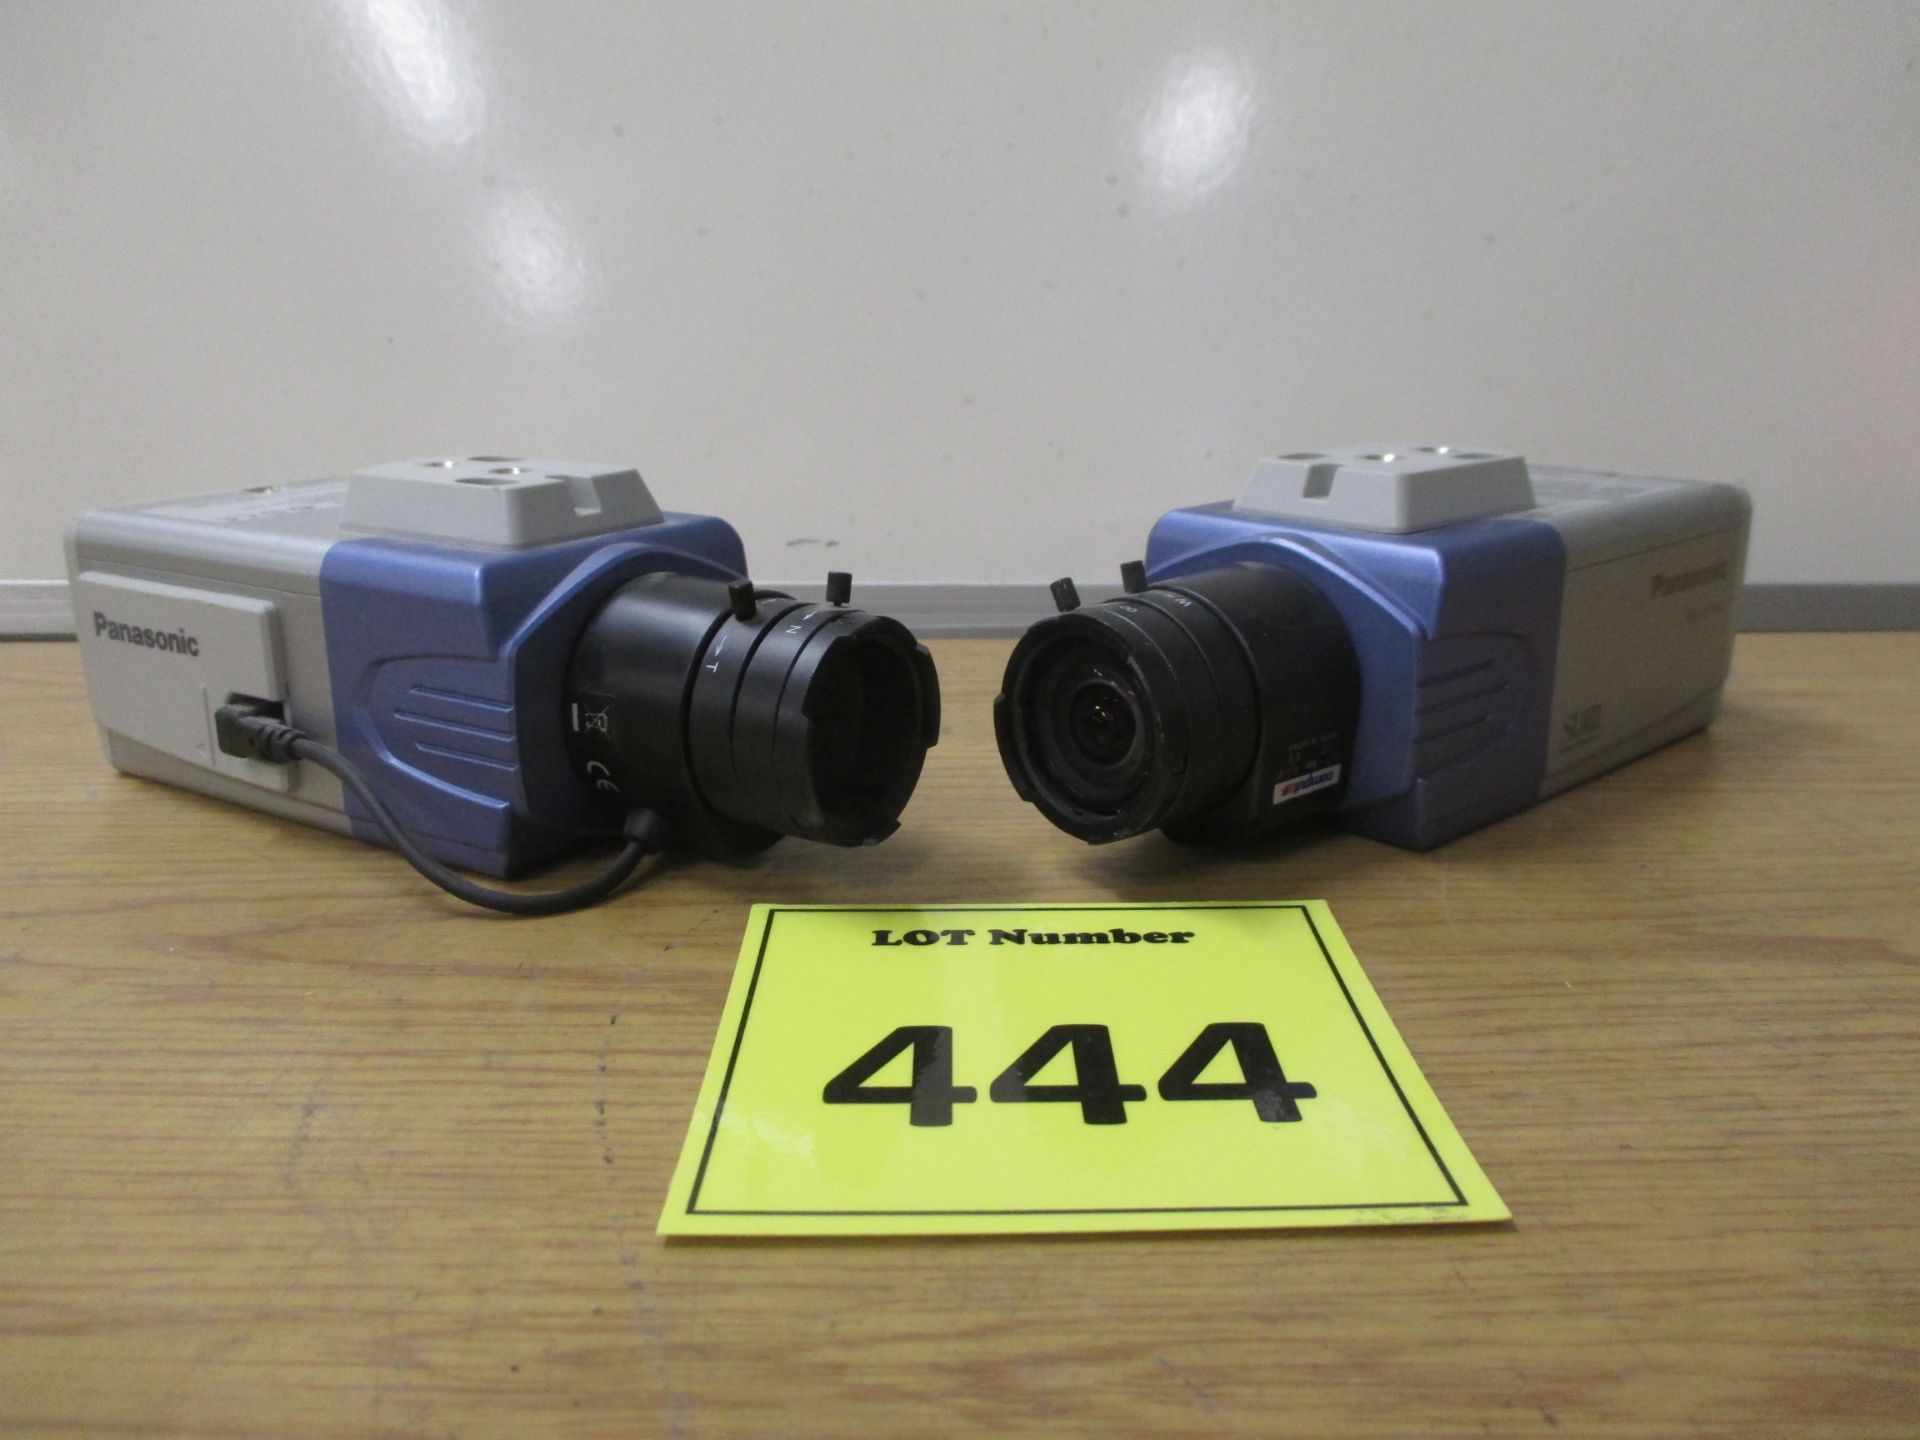 CCTV EQUIPMENT. 2 X PANASONIC SUPER DYNAMIC COLOUR CCTV CAMERAS MODEL WV-CP480/G COMPLETE WITH